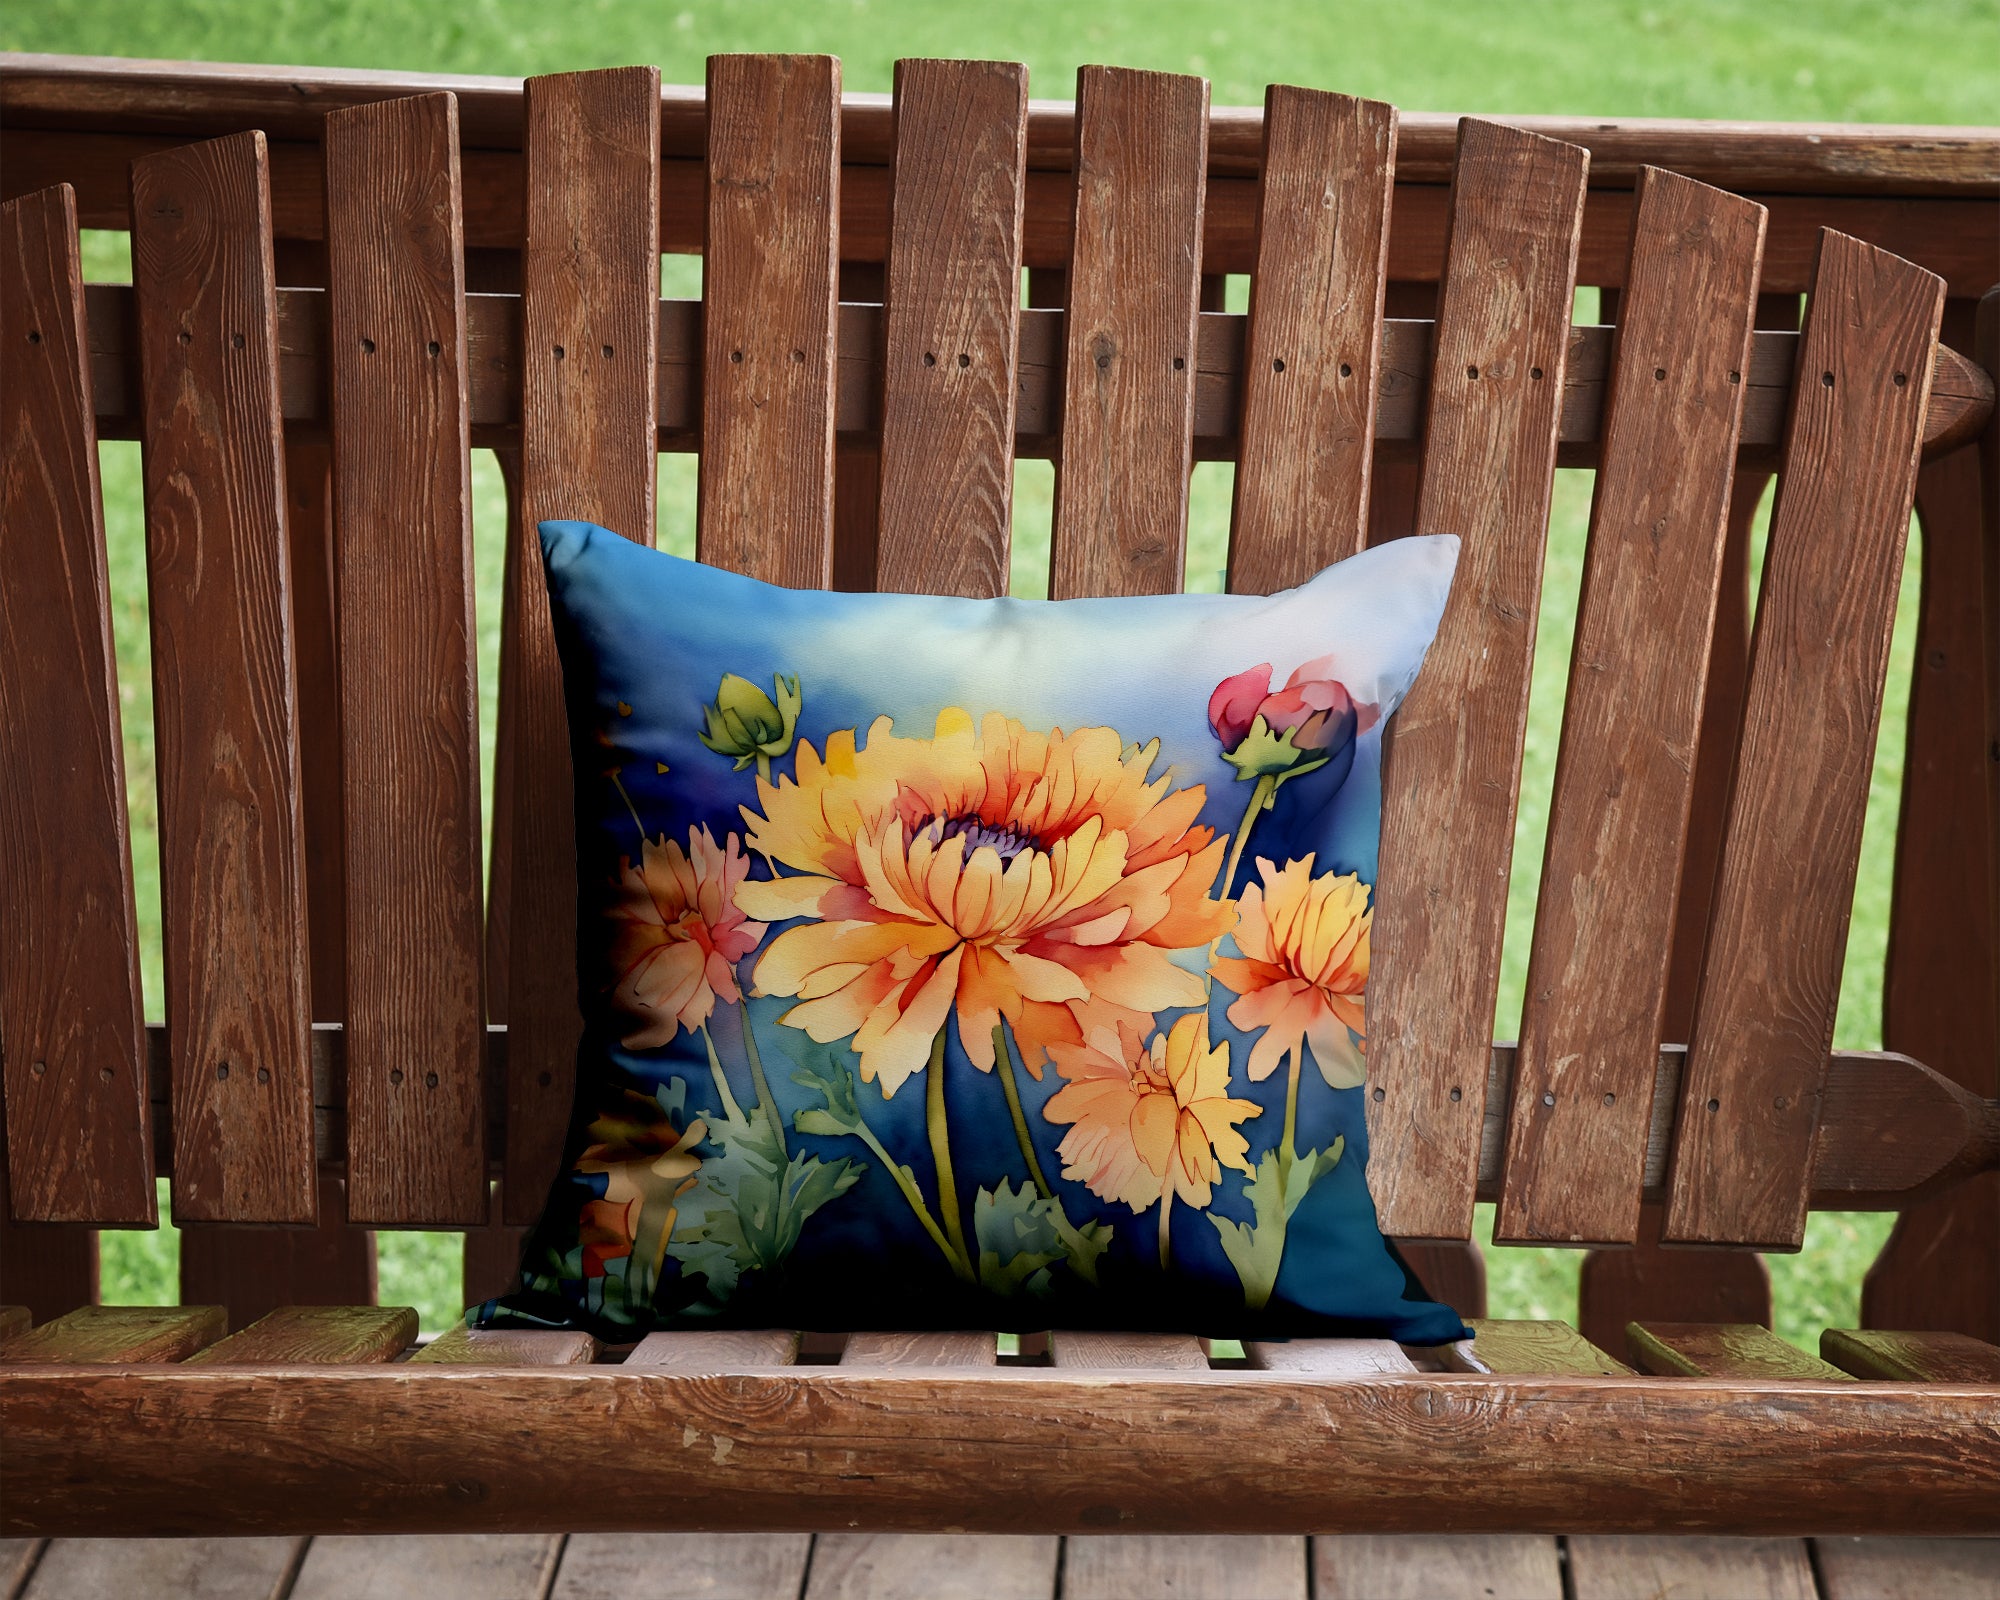 Buy this Chrysanthemums in Watercolor Throw Pillow